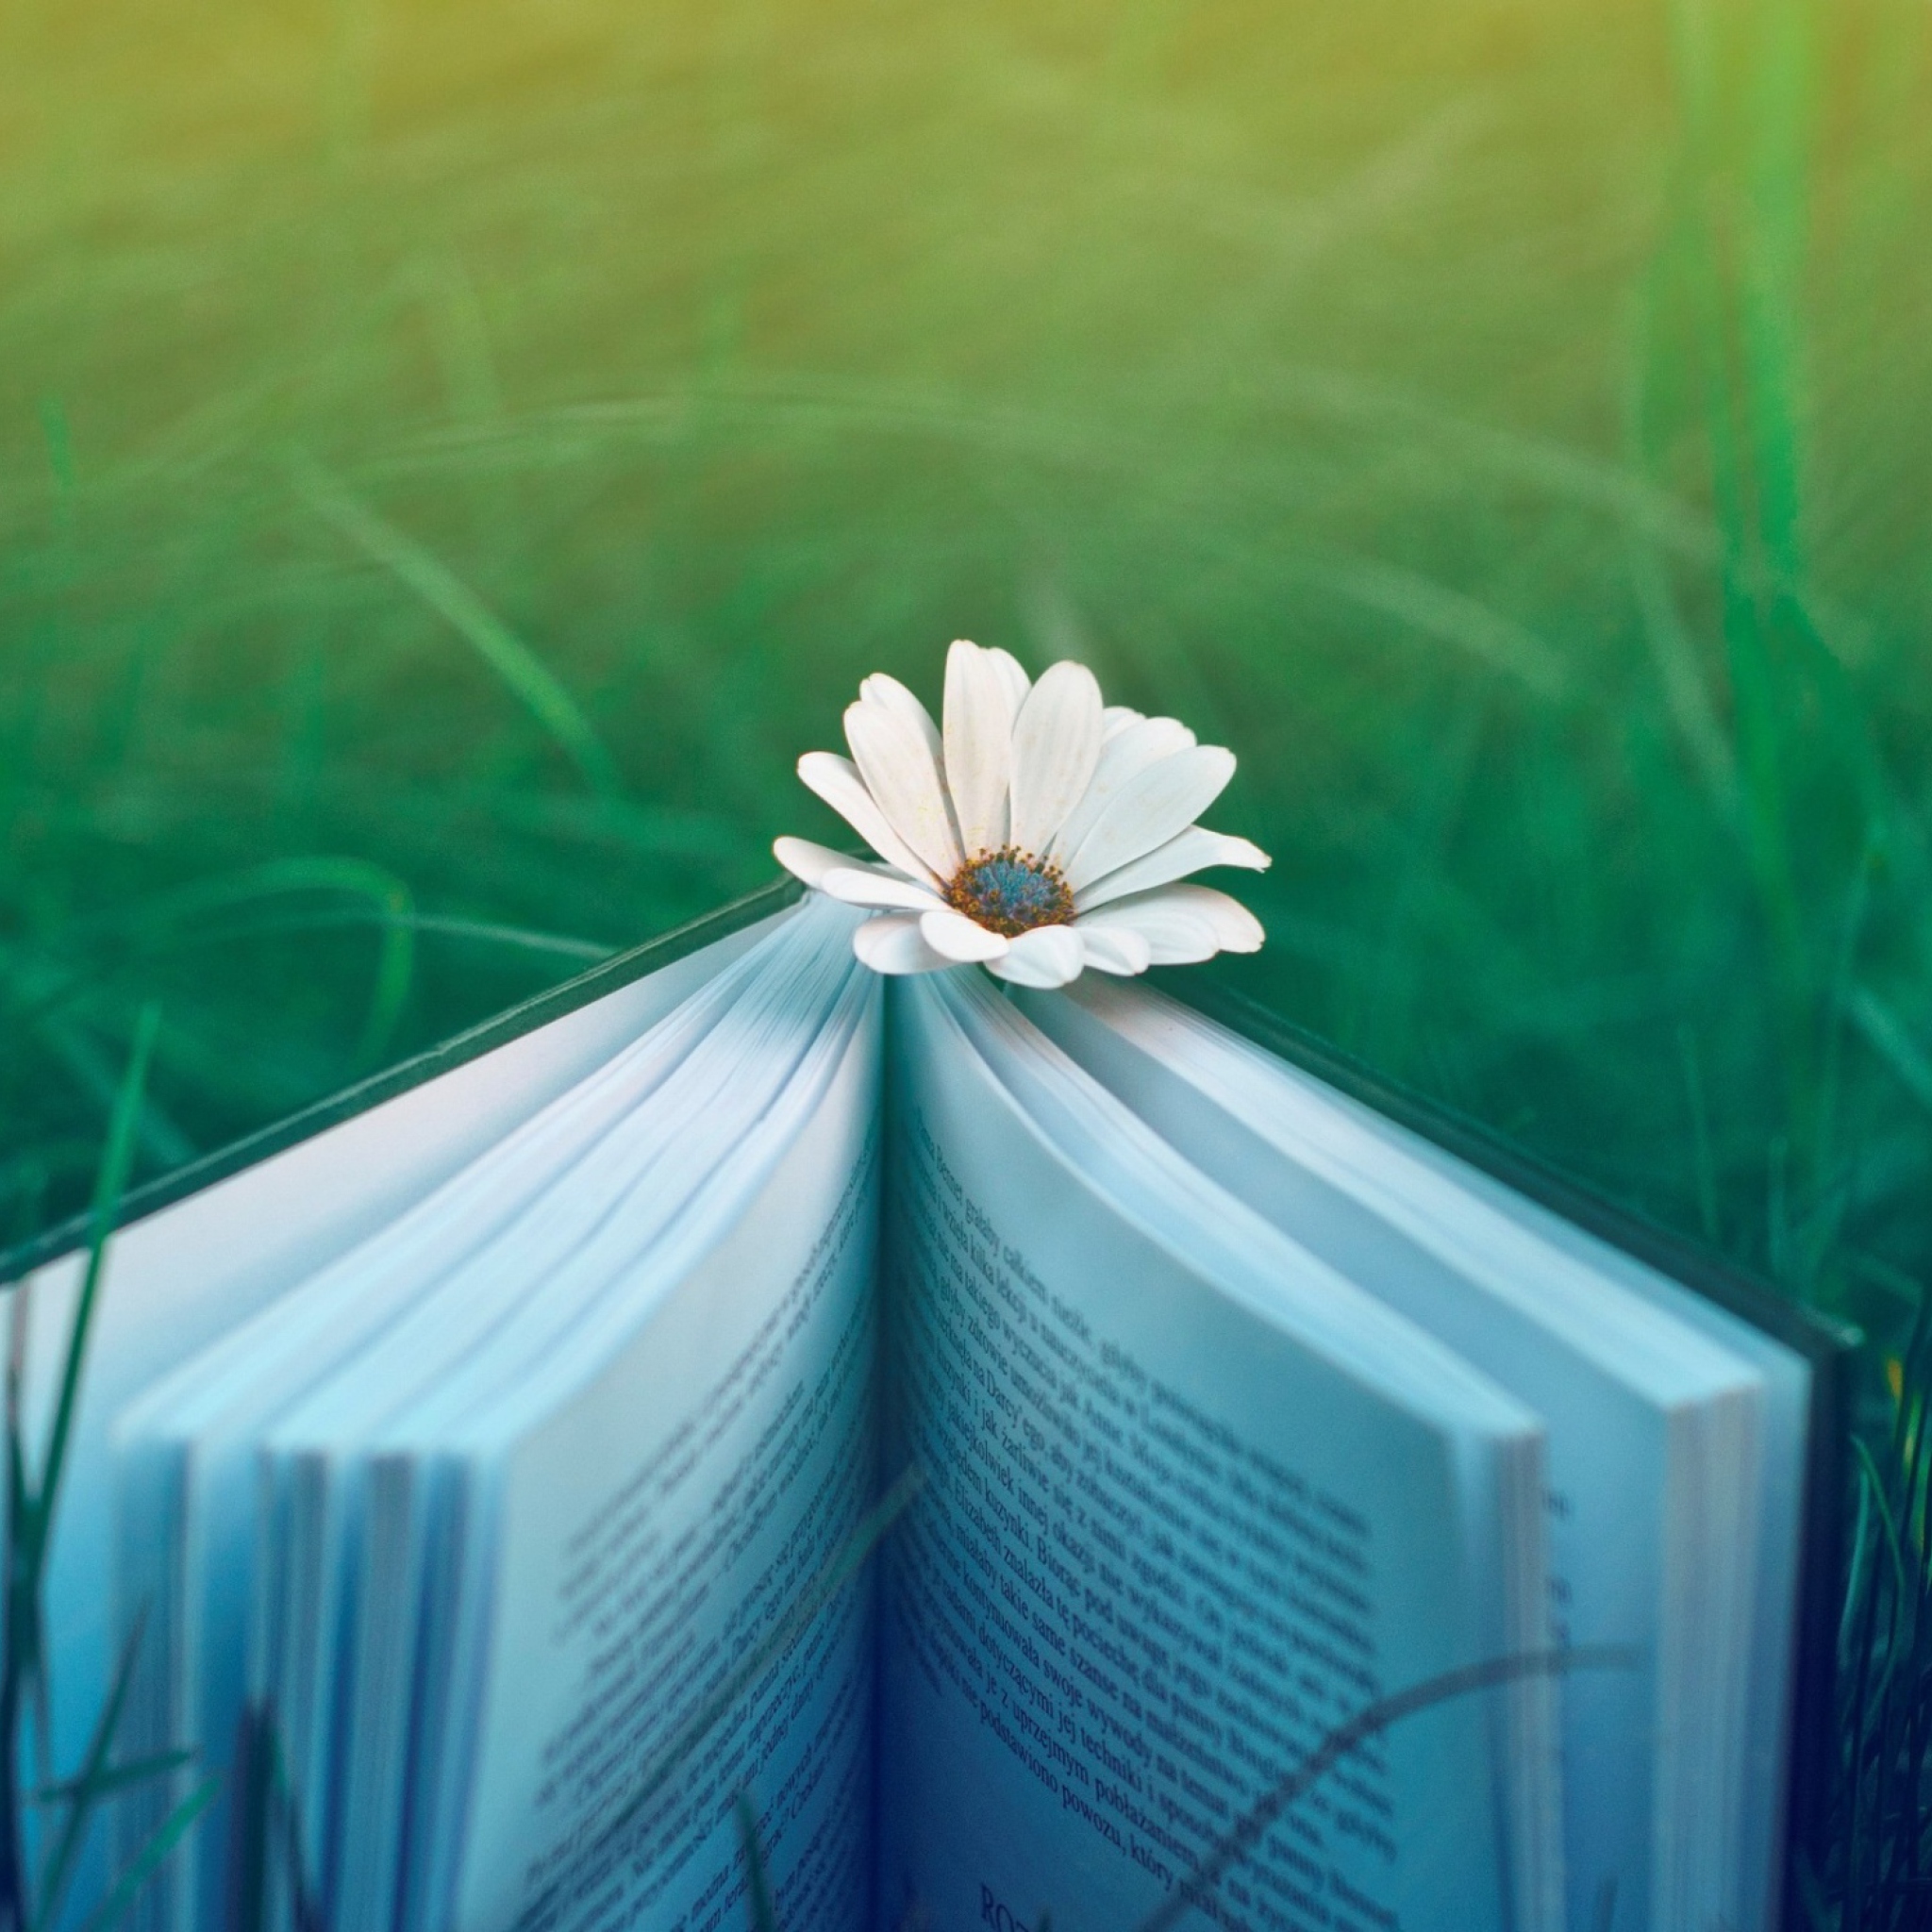 Book And Flower wallpaper 2048x2048